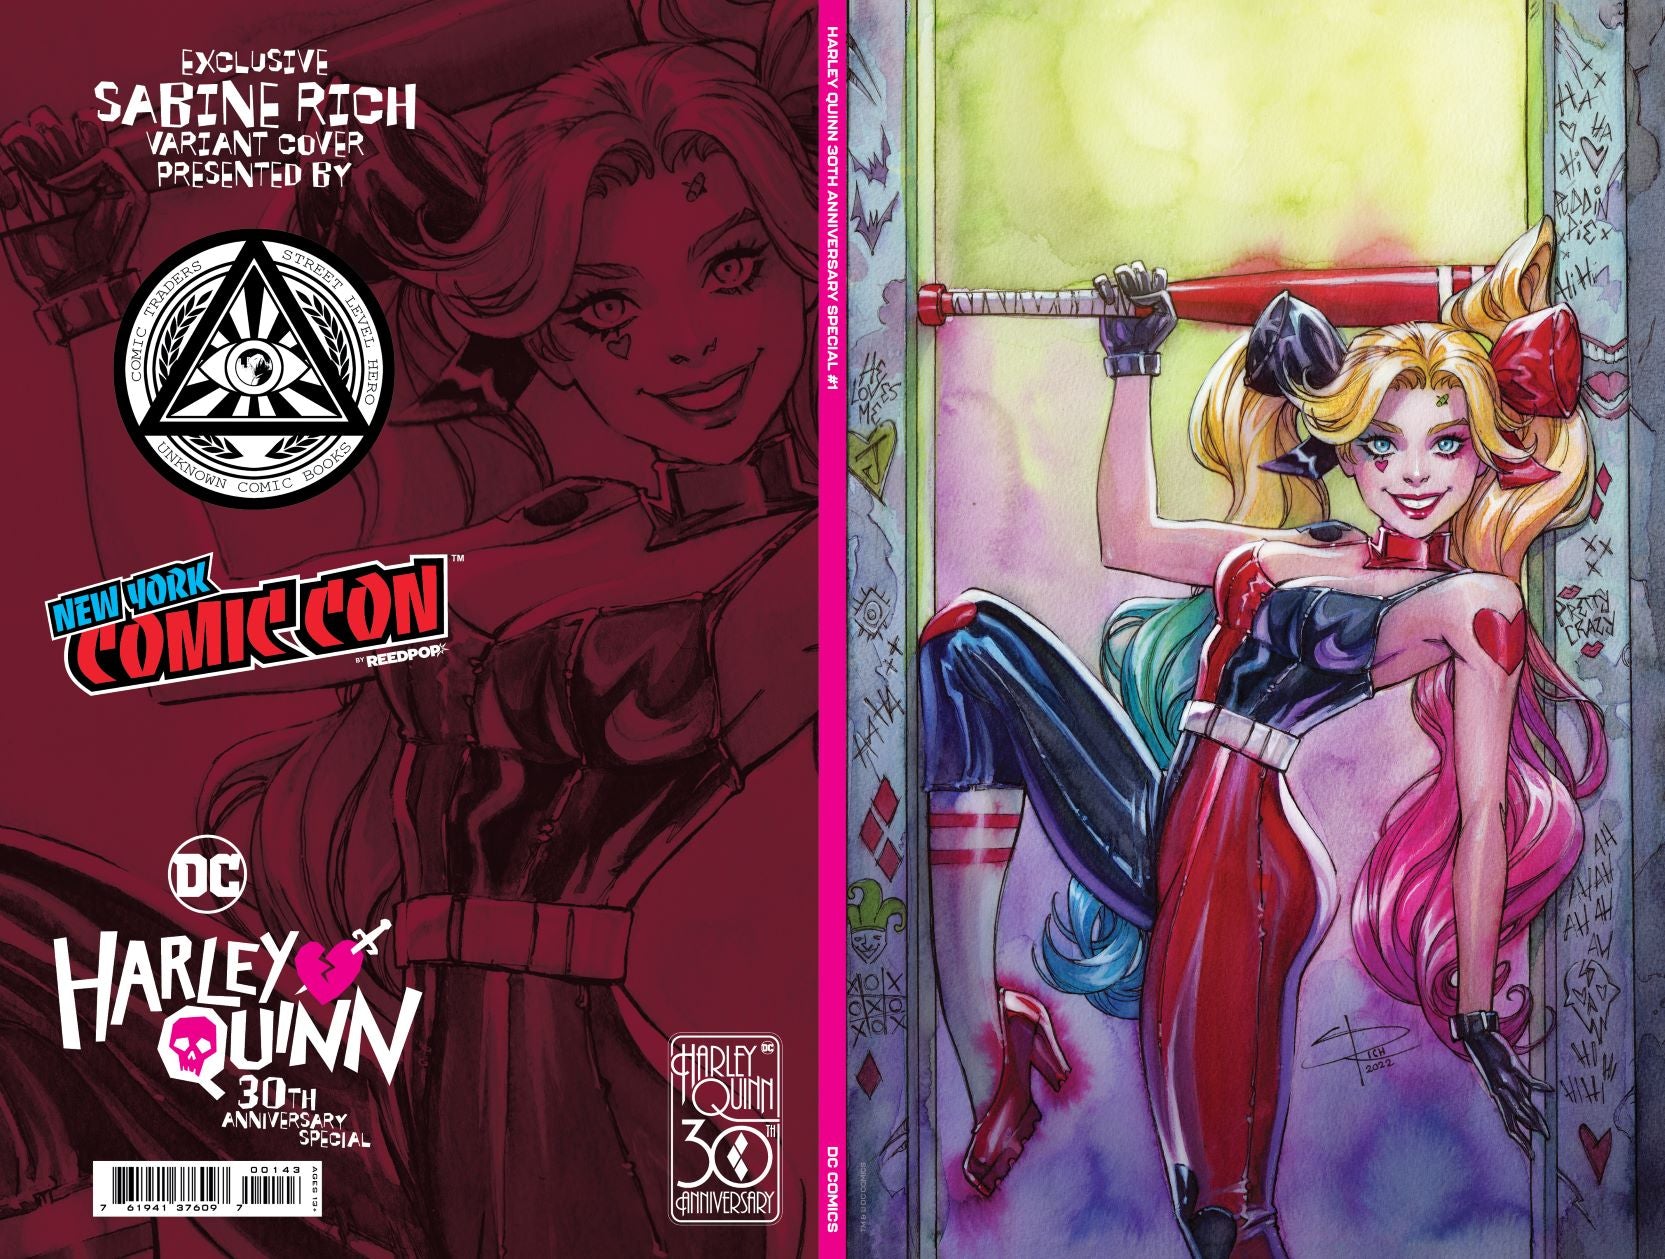 HARLEY QUINN 30TH ANNIVERSARY SPECIAL #1 (ONE SHOT) UNKNOWN COMICS SABINE RICH EXCLUSIVE NYCC 2022 FOIL VIRGIN VAR (11/02/2022)